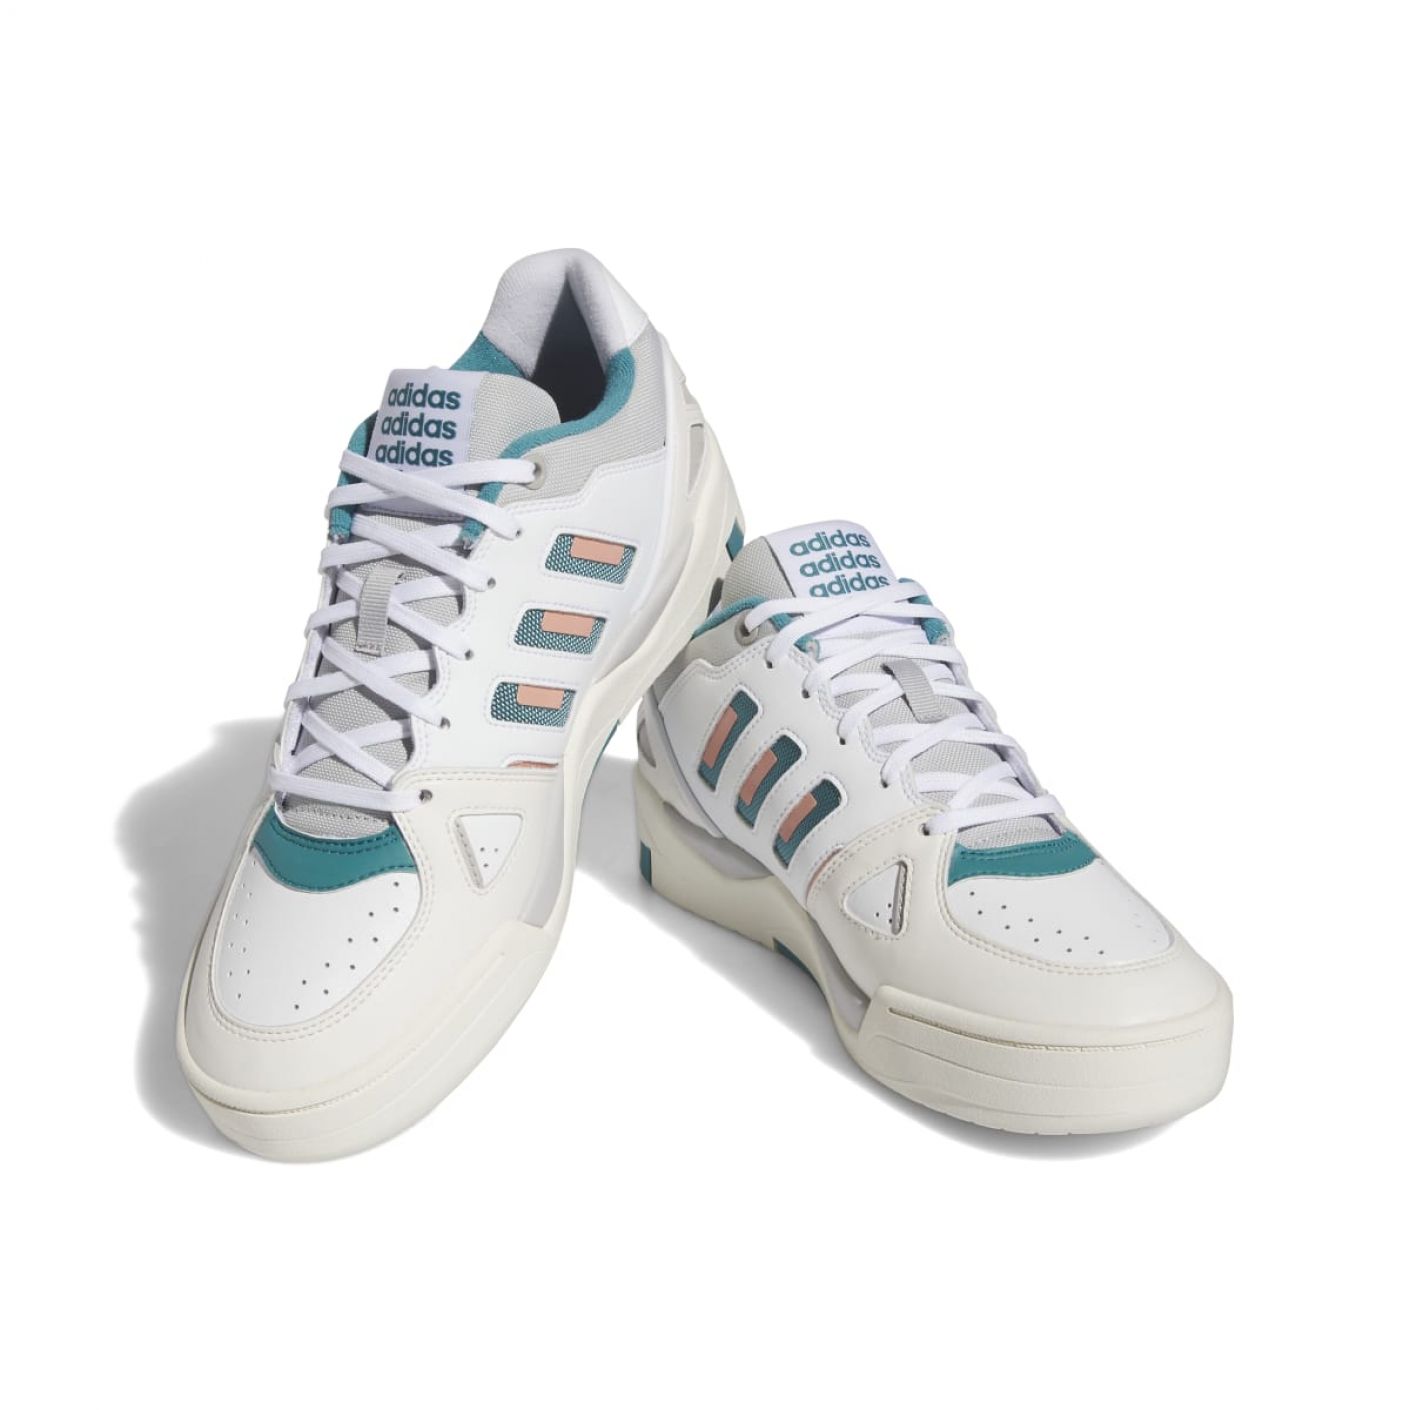 Adidas Midcity Low Ftwr White